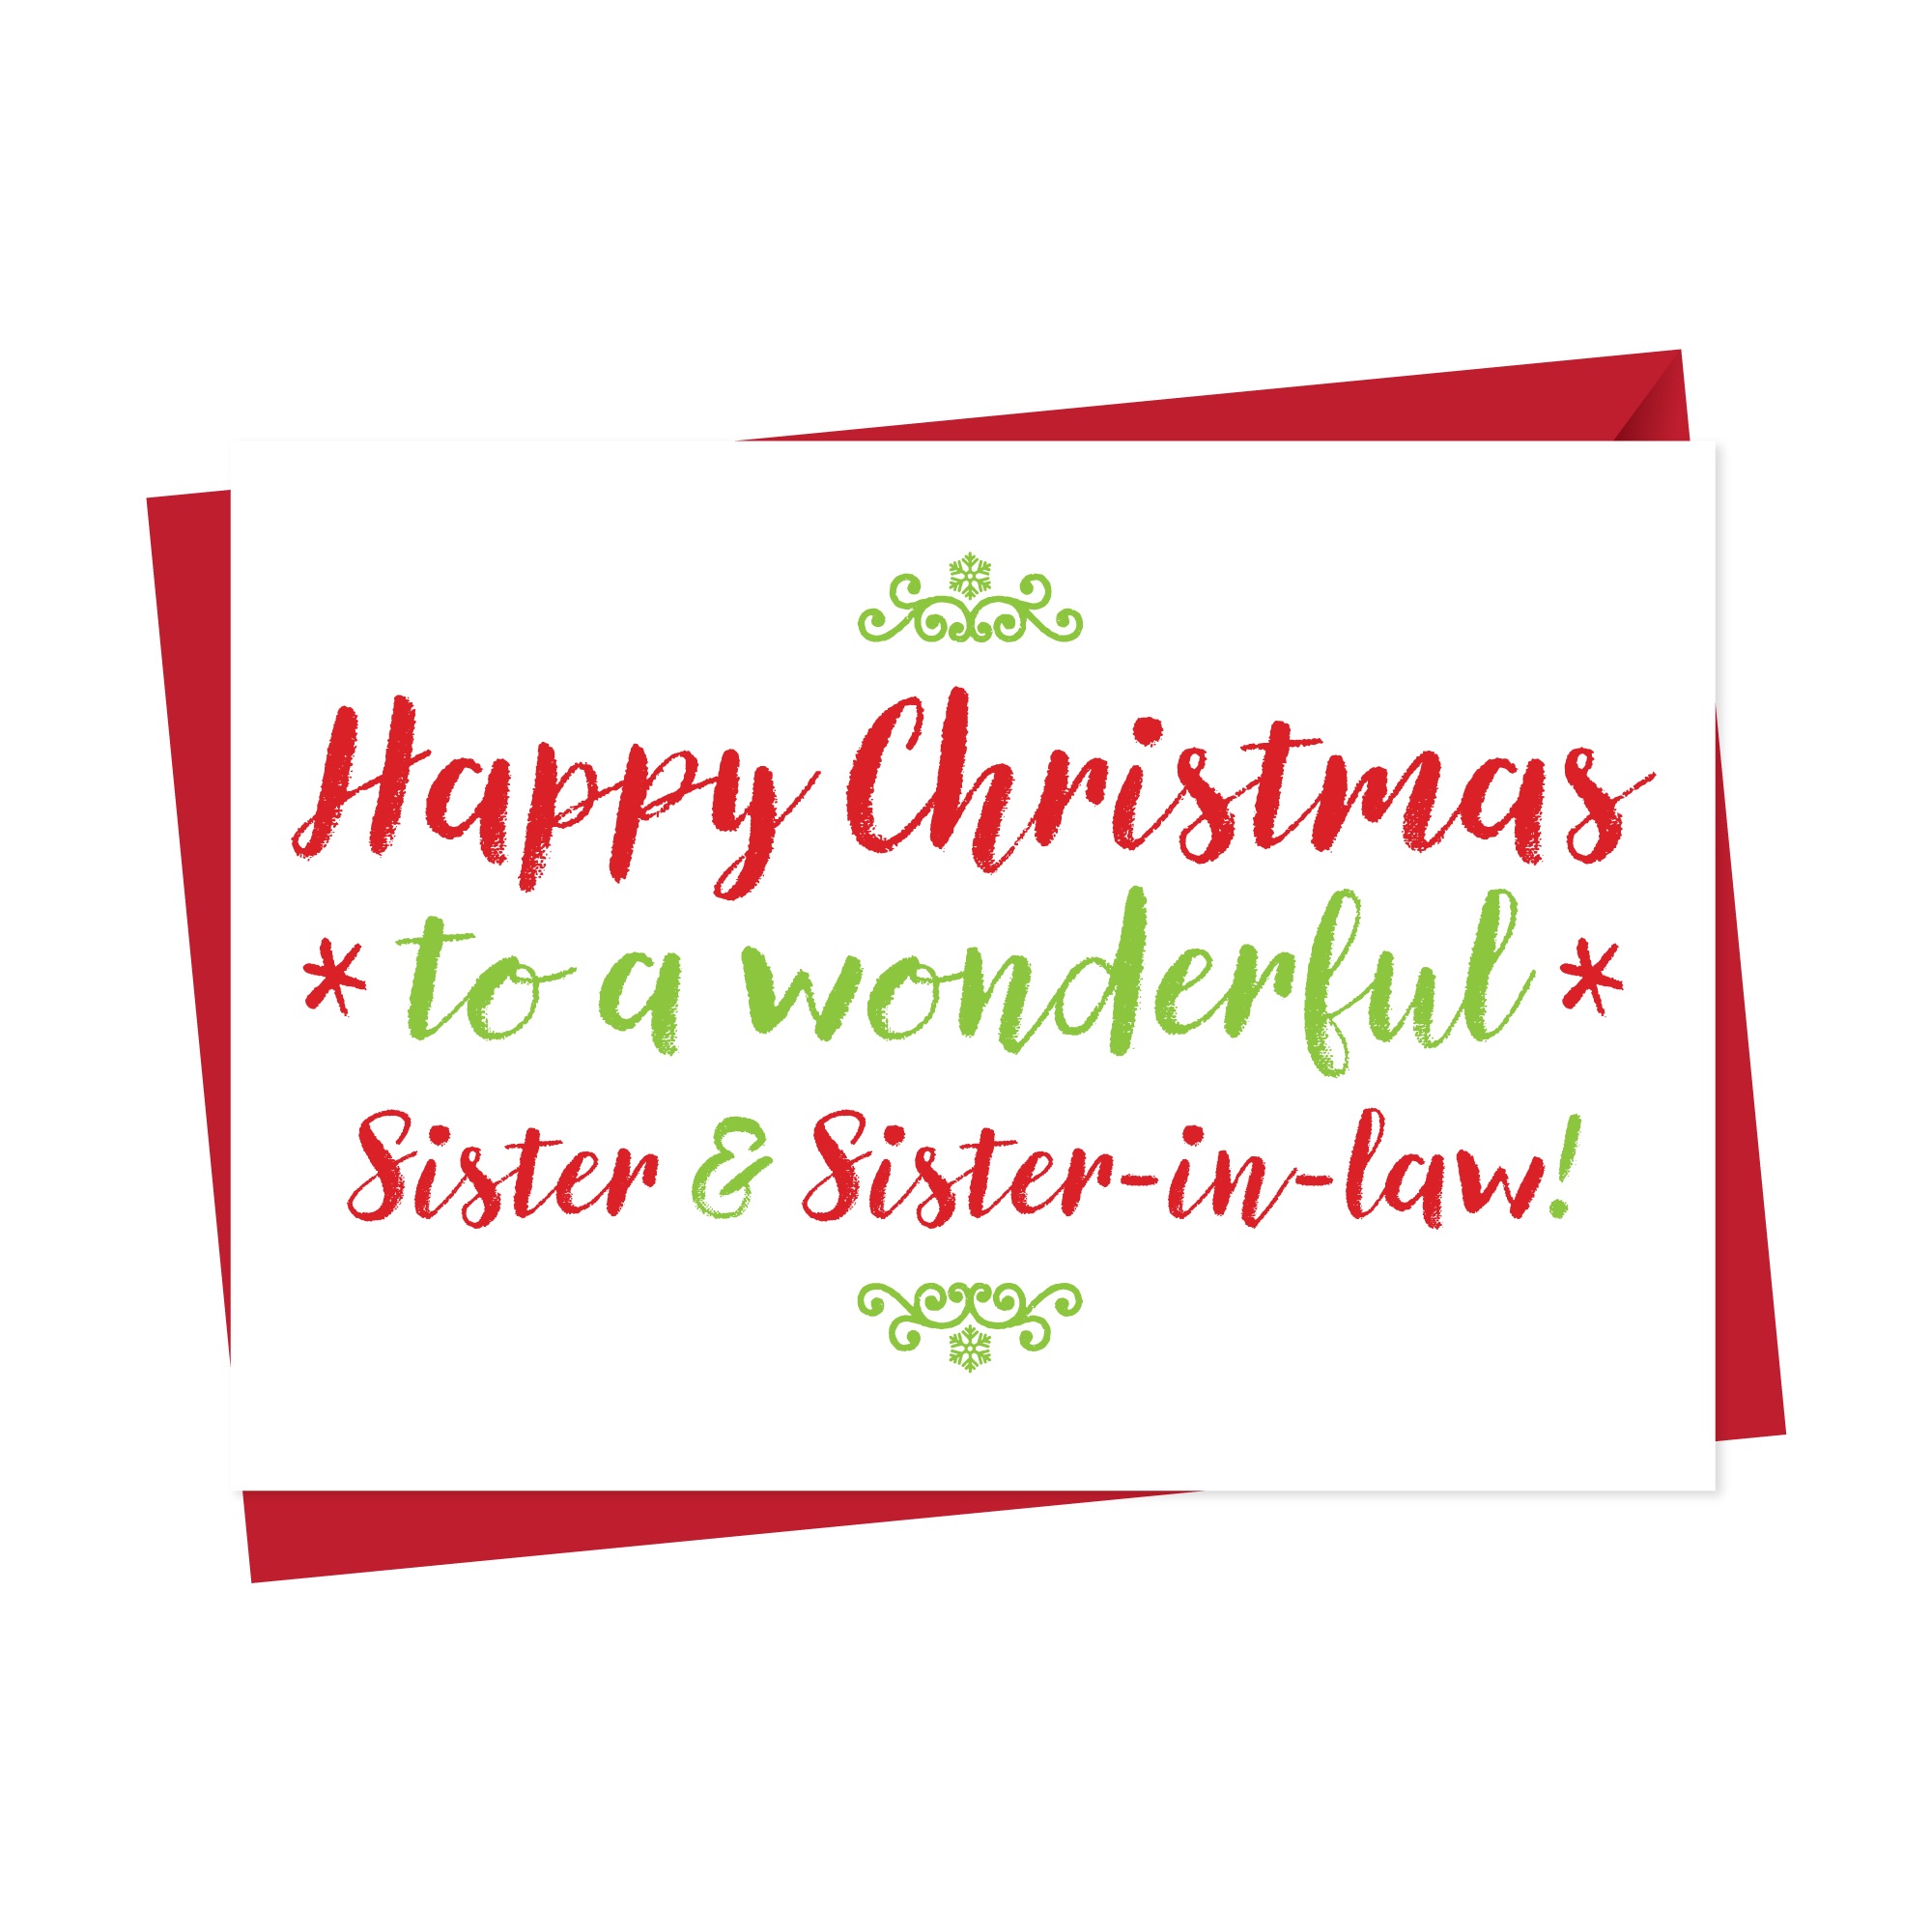 Christmas Card For Wonderful Sister & Sister in law